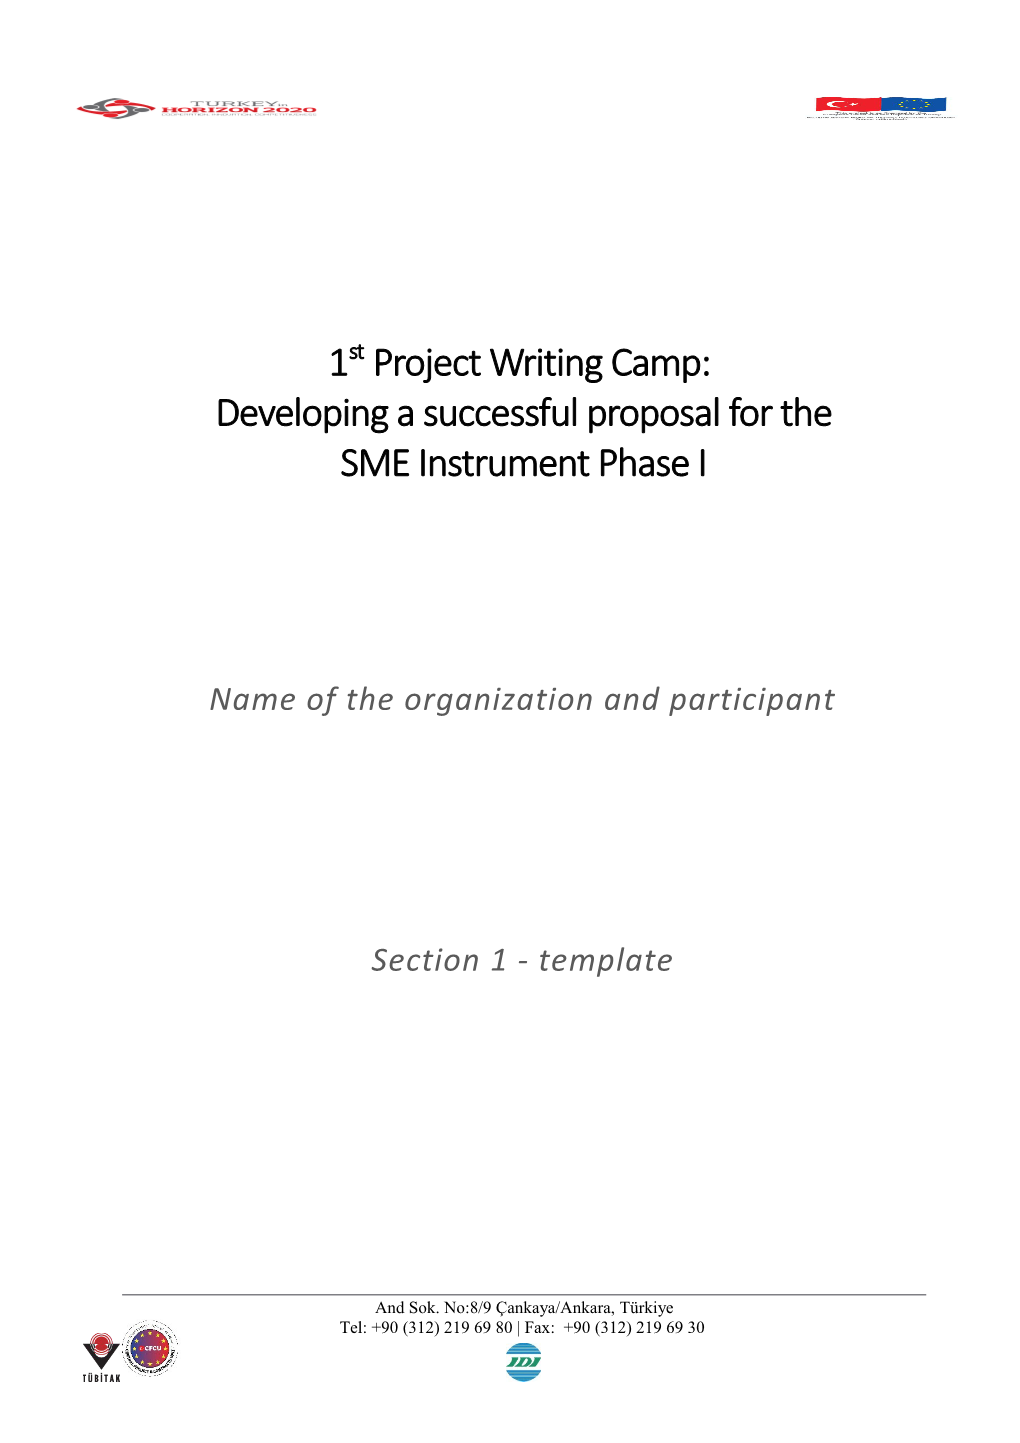 Developing a Successful Proposal for The